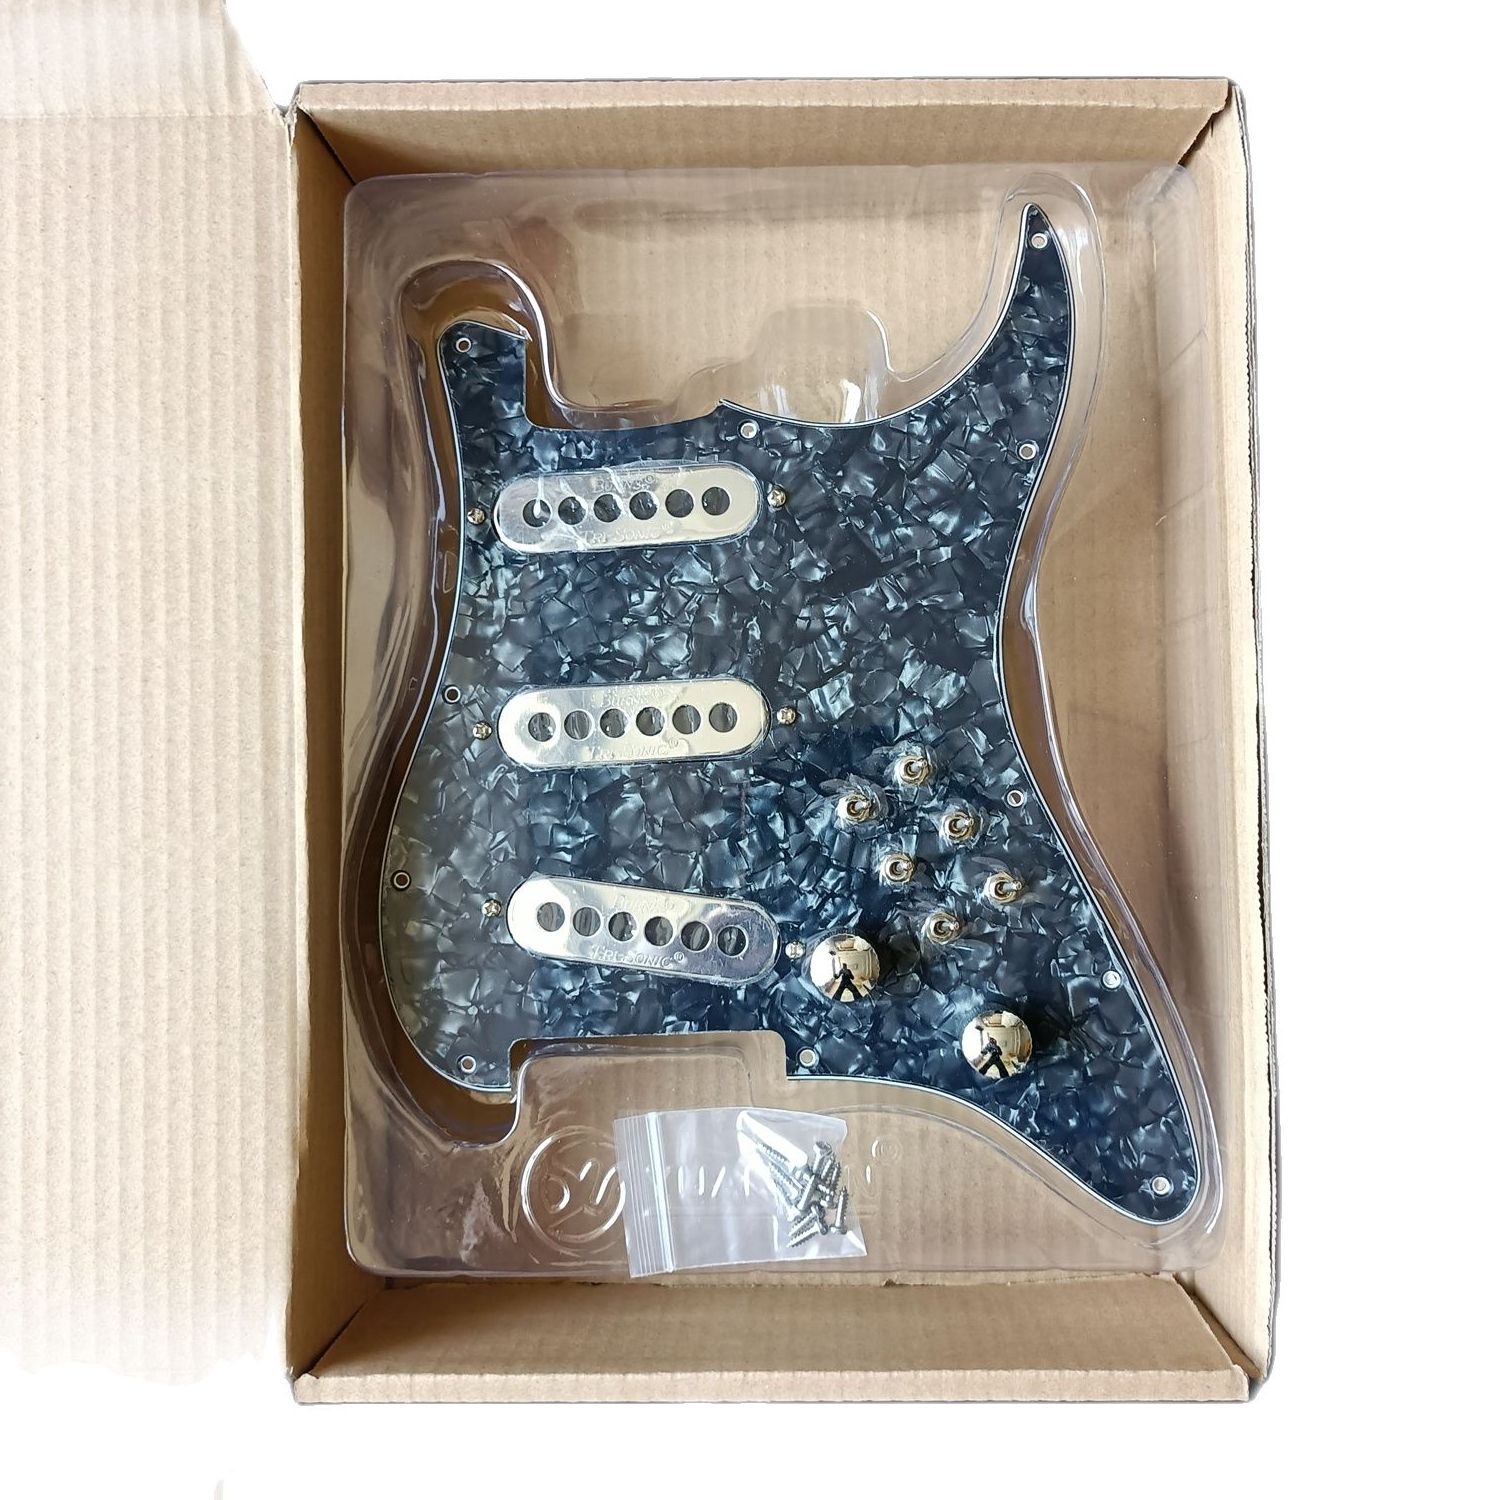 Updated Prewired SSS Pickguard Silver Burns Tri-Sonic Pickups For BM Special Guitar Welding Harness 1 Set от DHgate WW